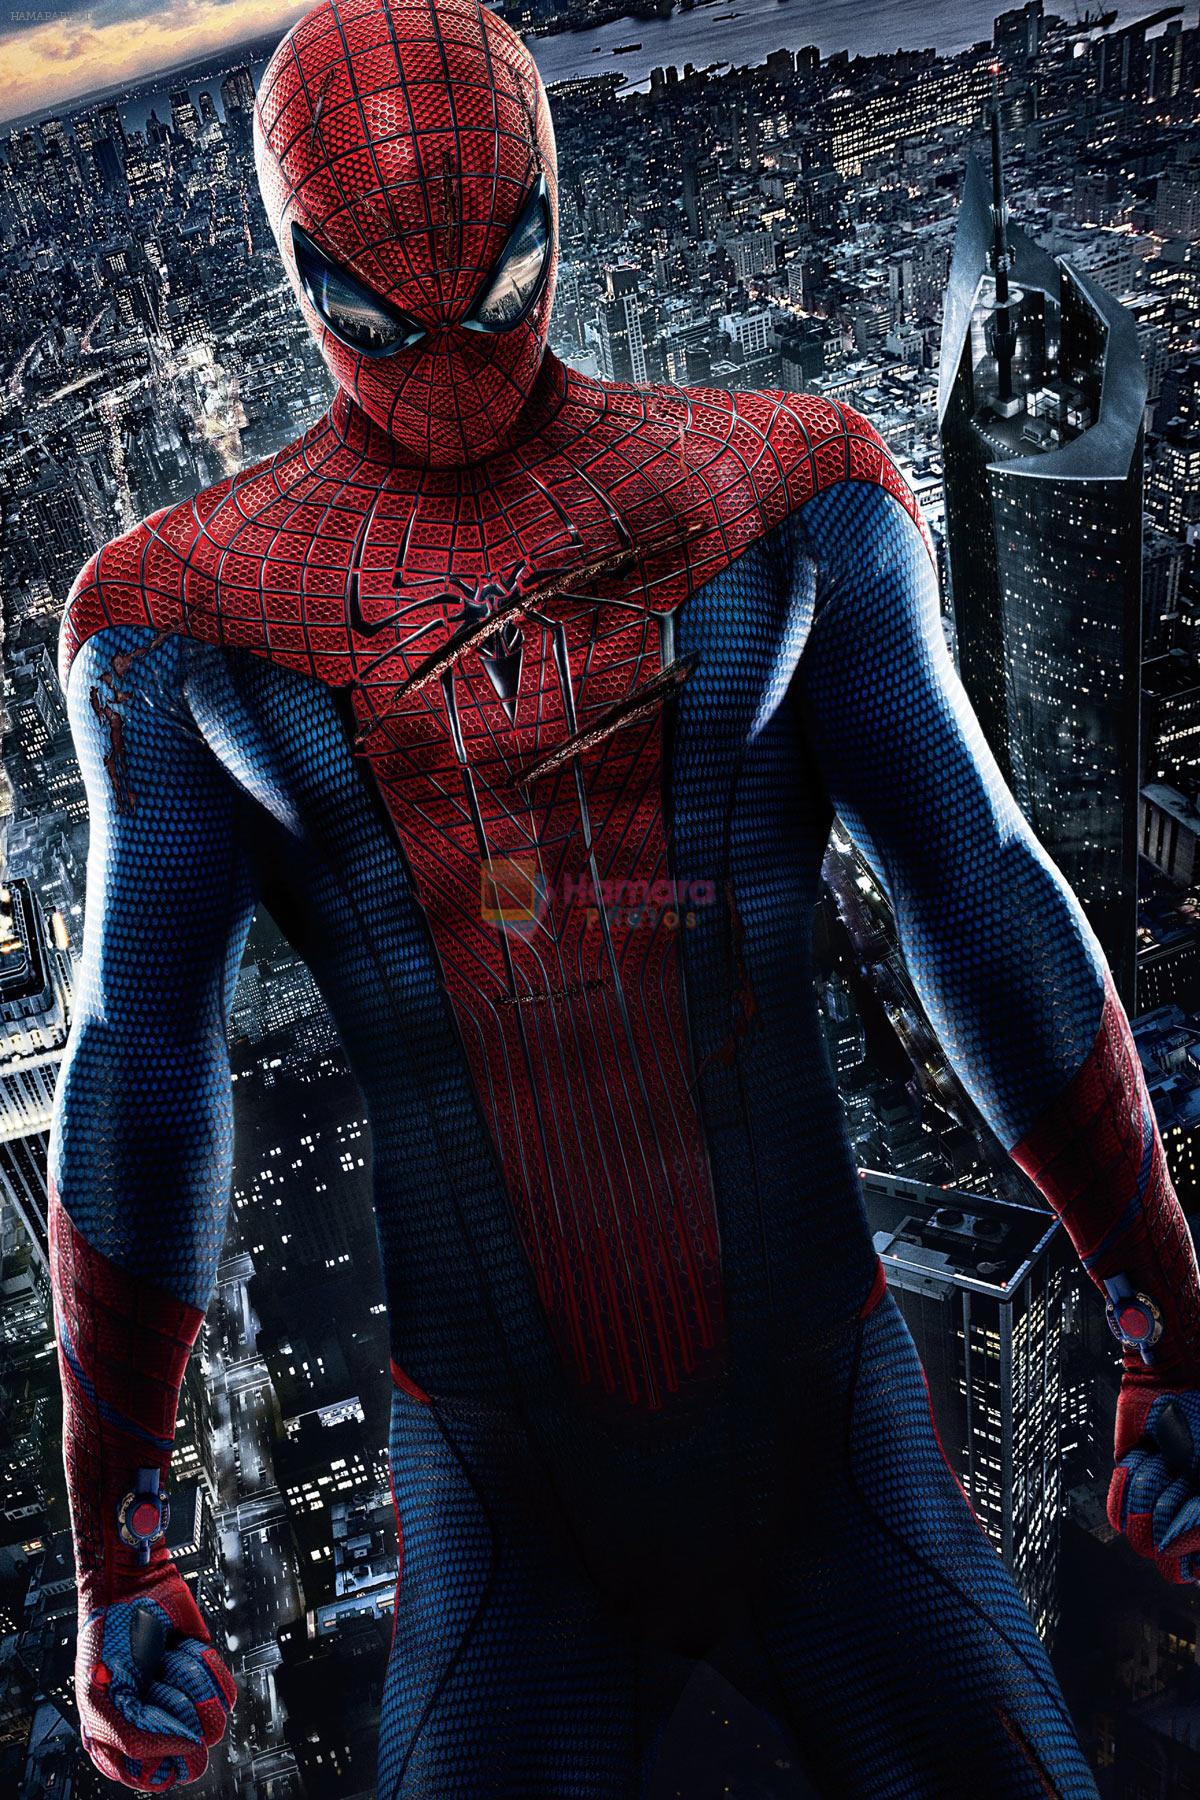 Andrew Garfield in the still from movie The Amazing Spider-Man